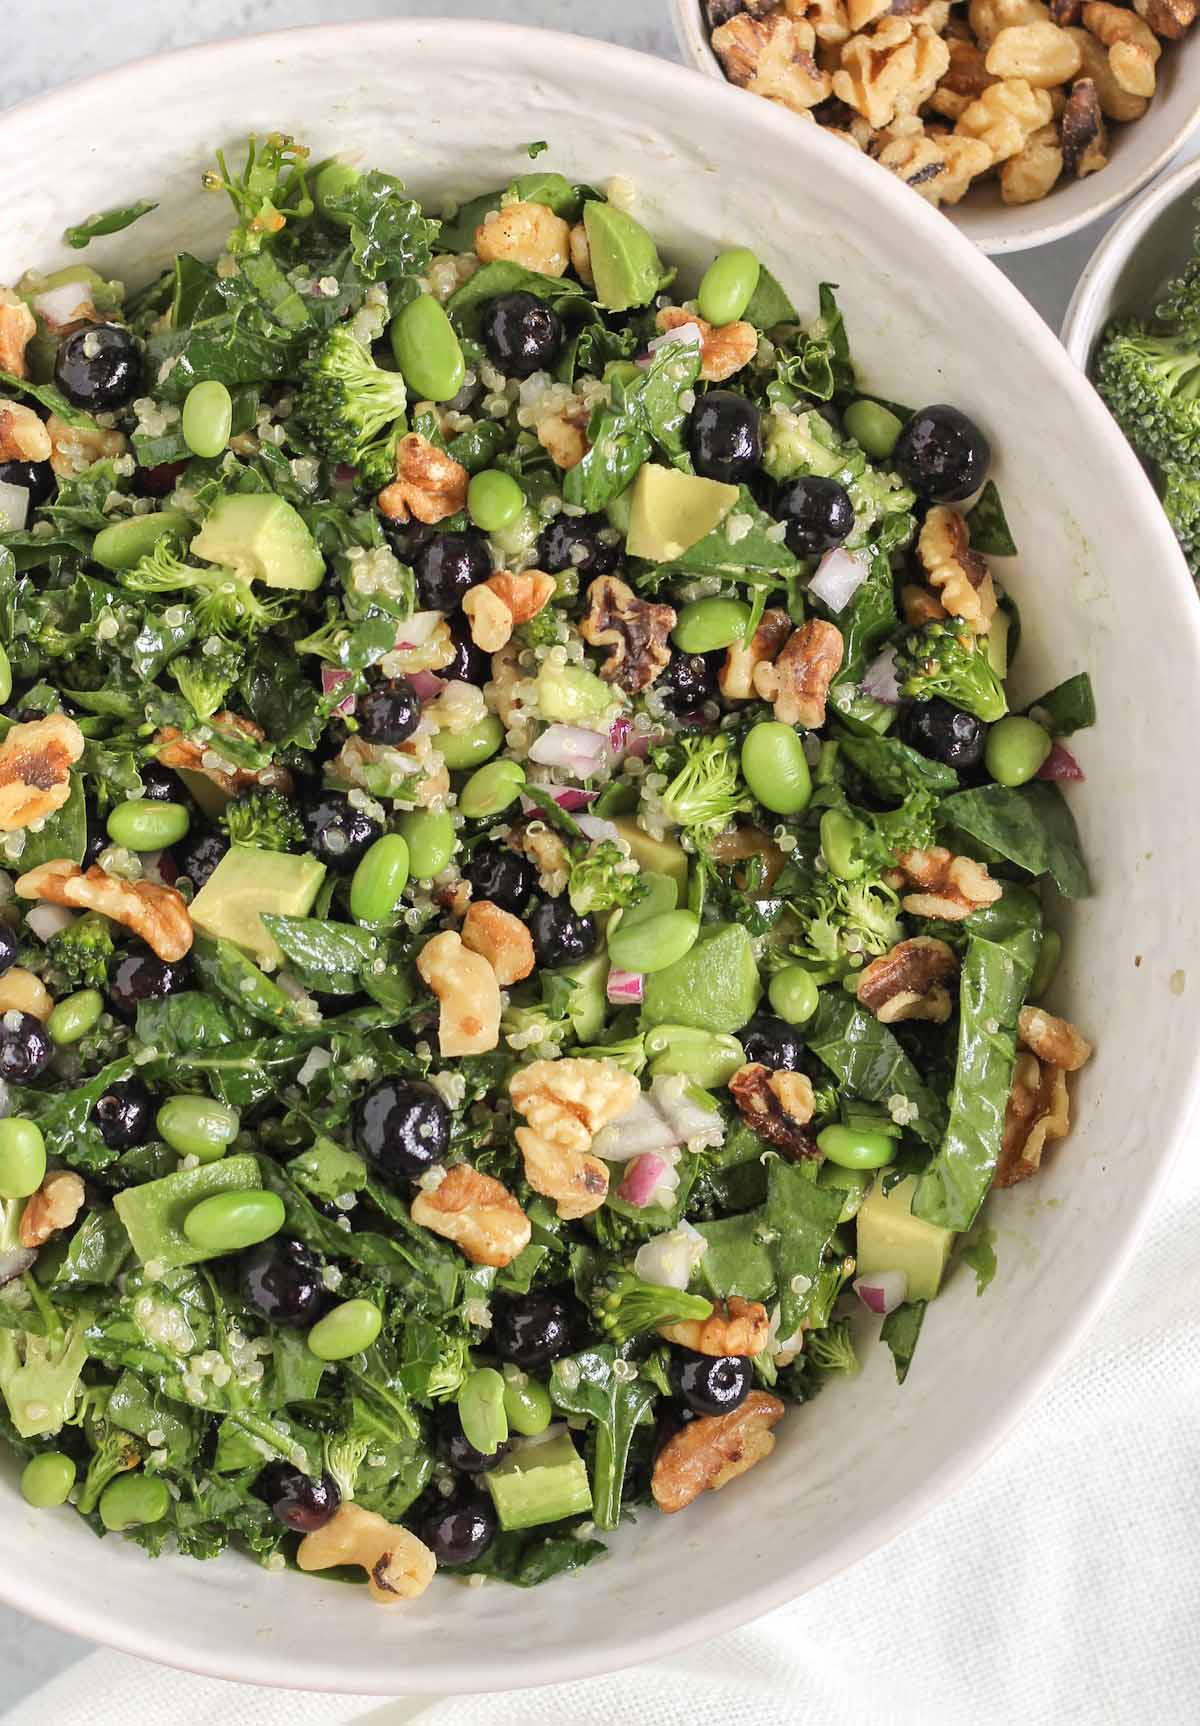 Superfood salad in a large white serving bowl with a bowl of walnuts and broccoli on the side.